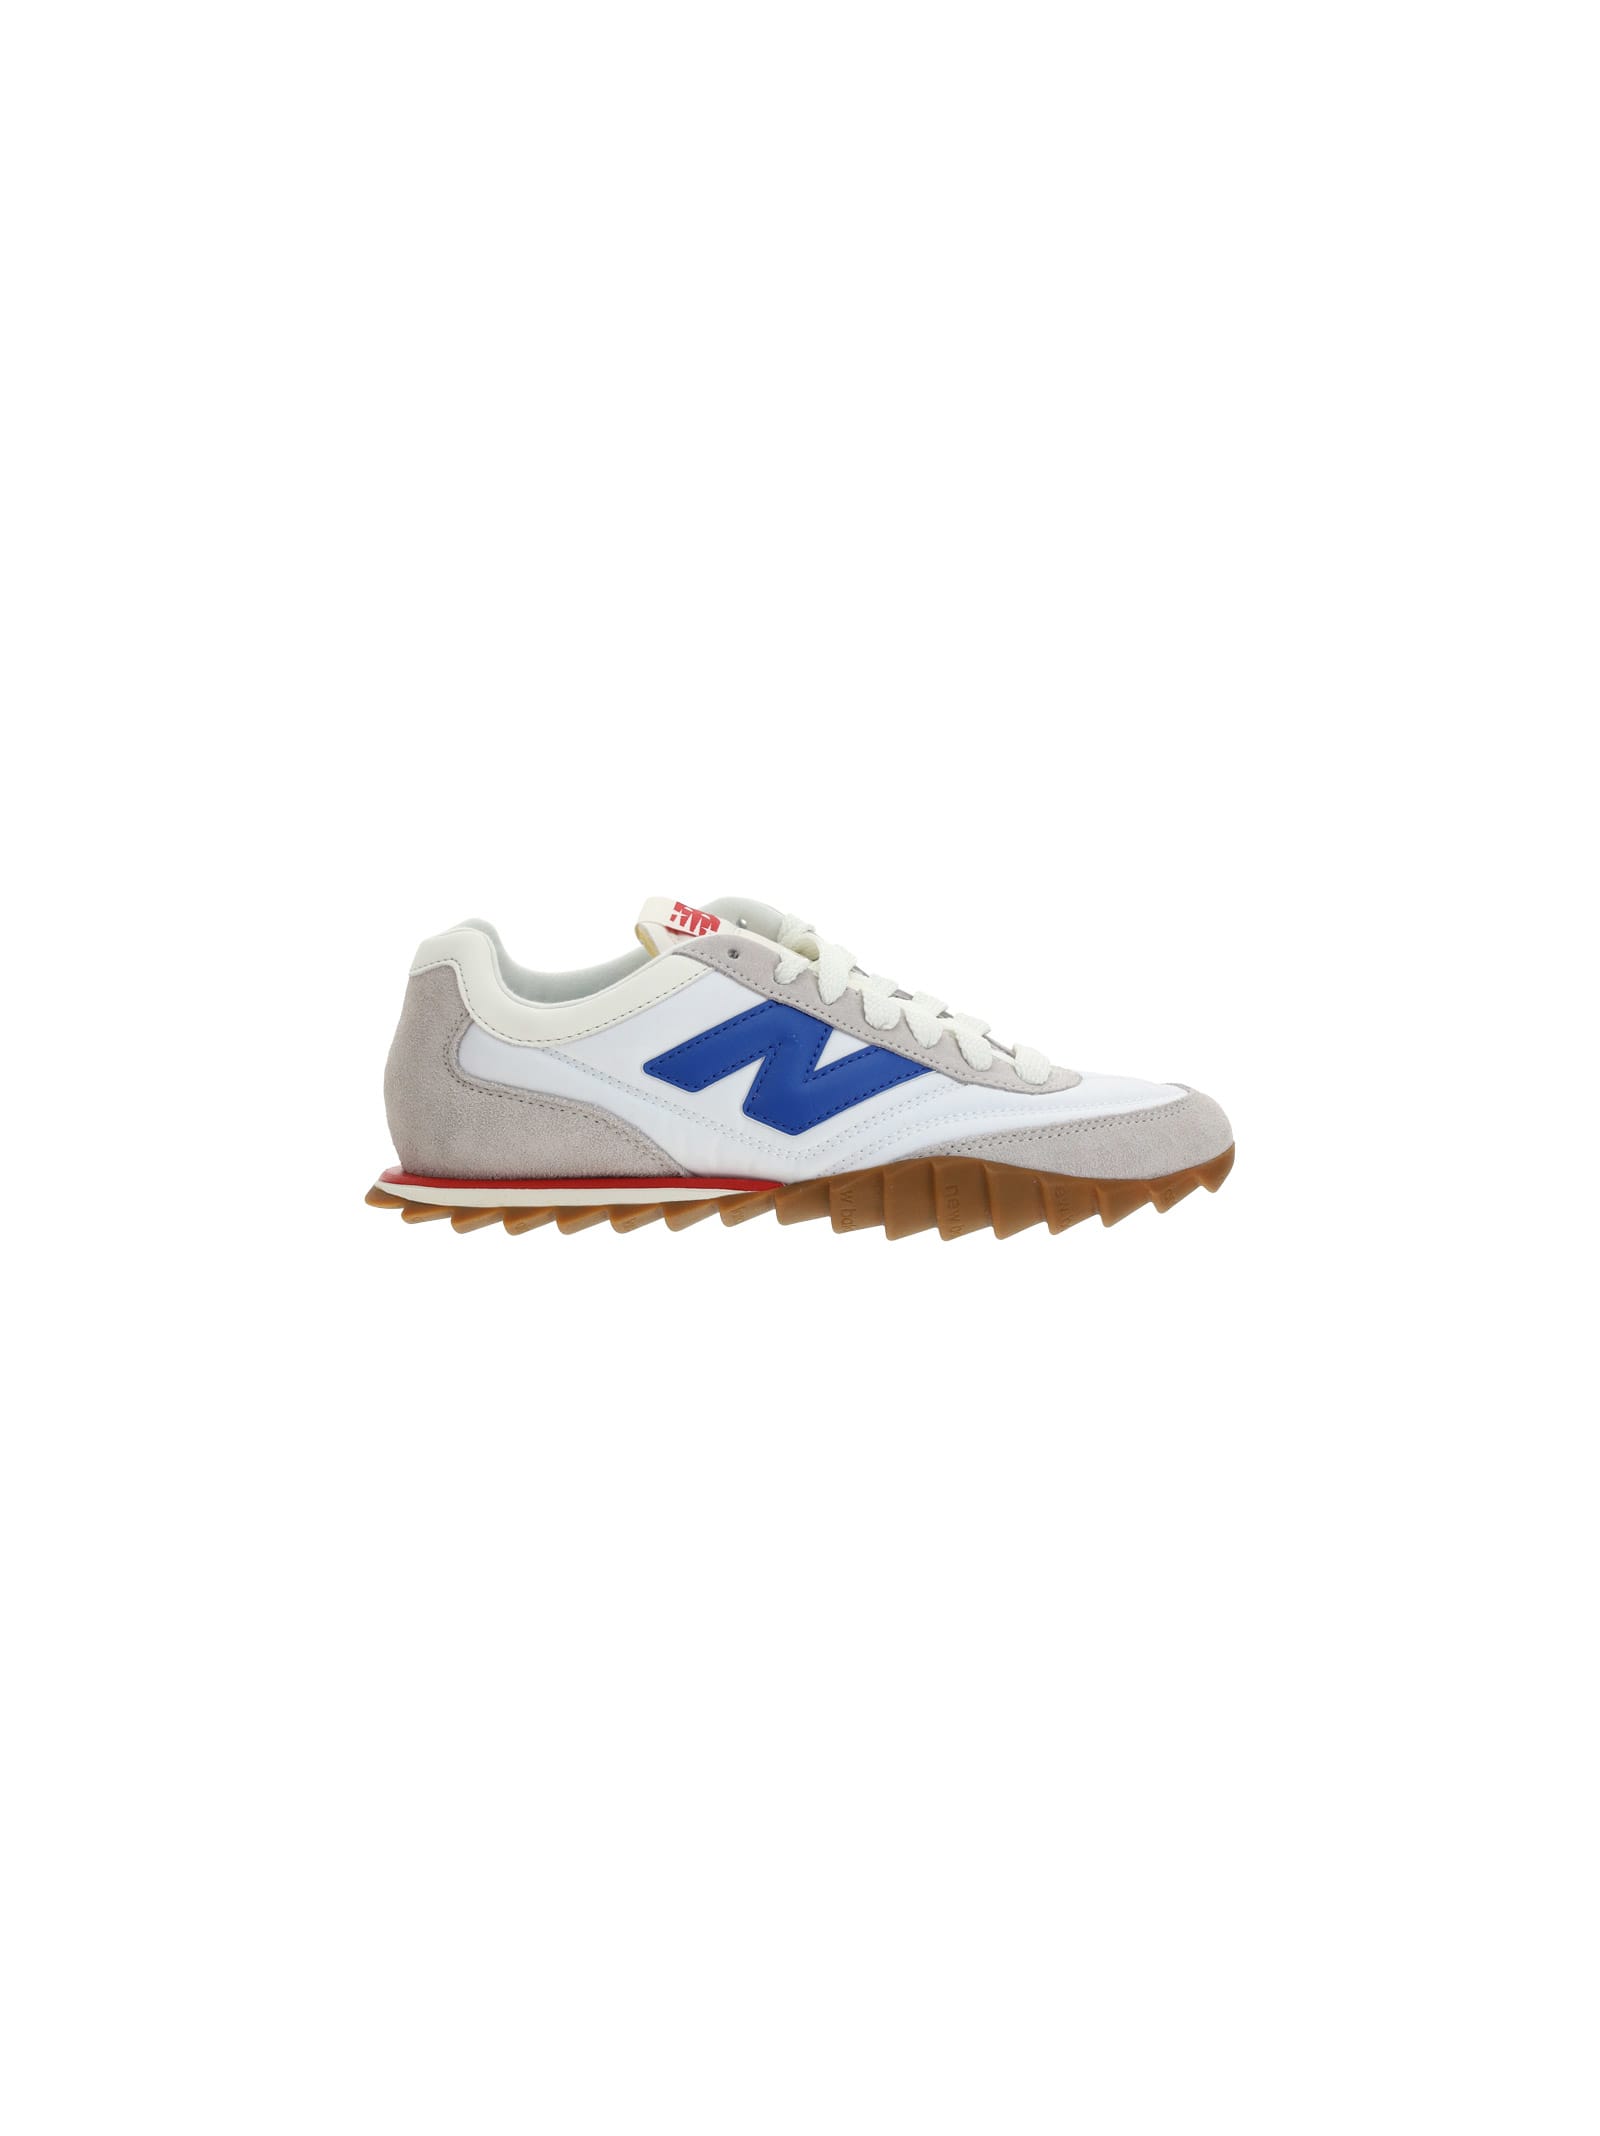 New Balance Rc30 Sneakers